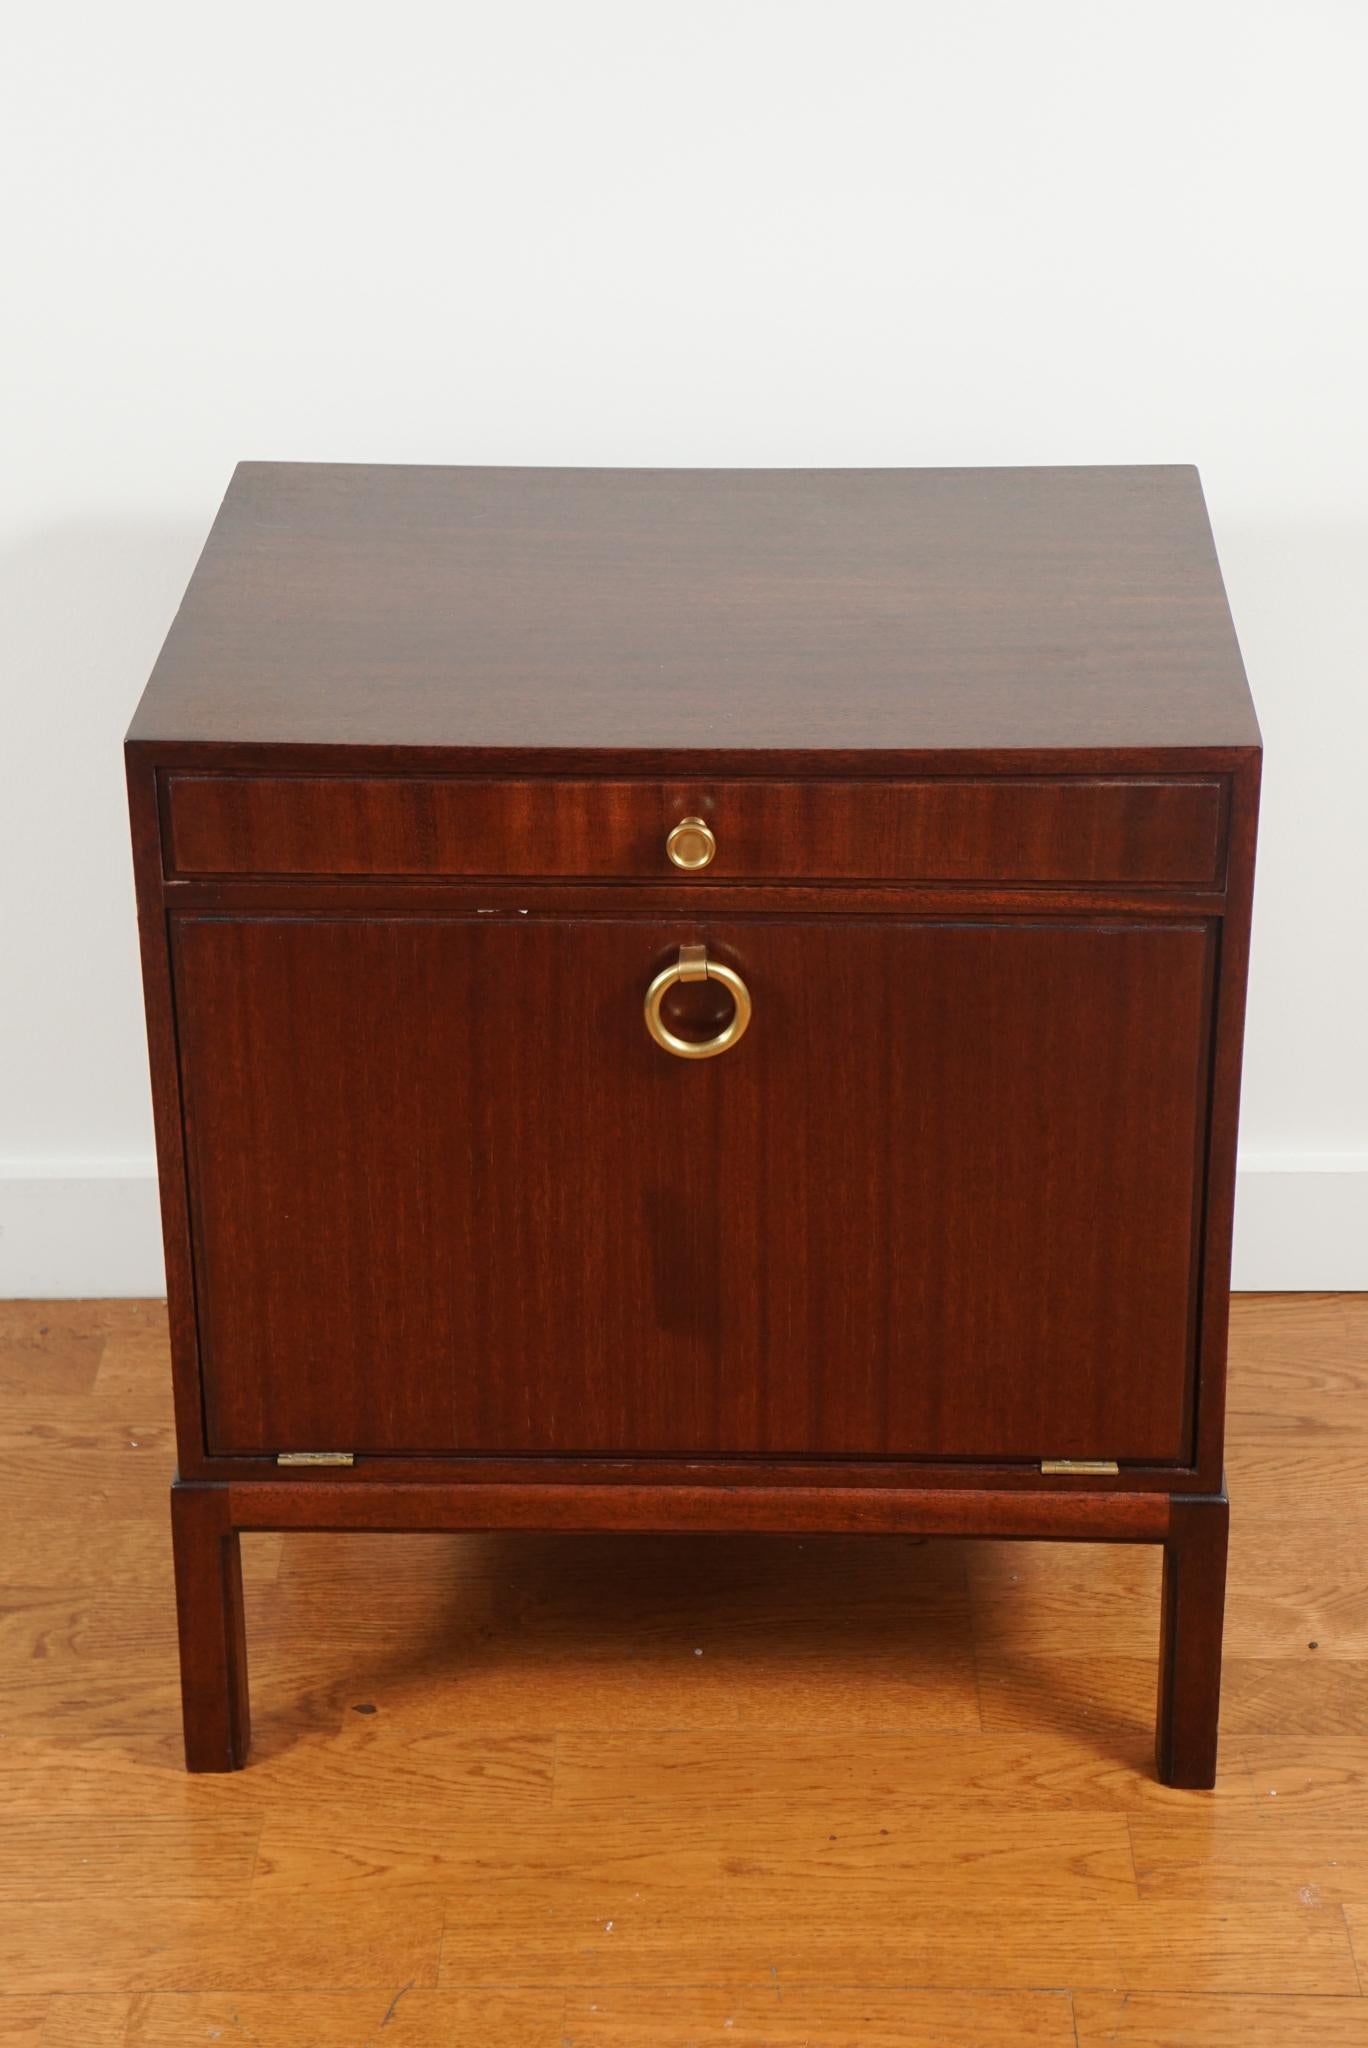 Designed by Tommi Parzinger, for Charak Modern (signed)
This charming mahogany nightstand has one narrow drawer and a drop front storage area.